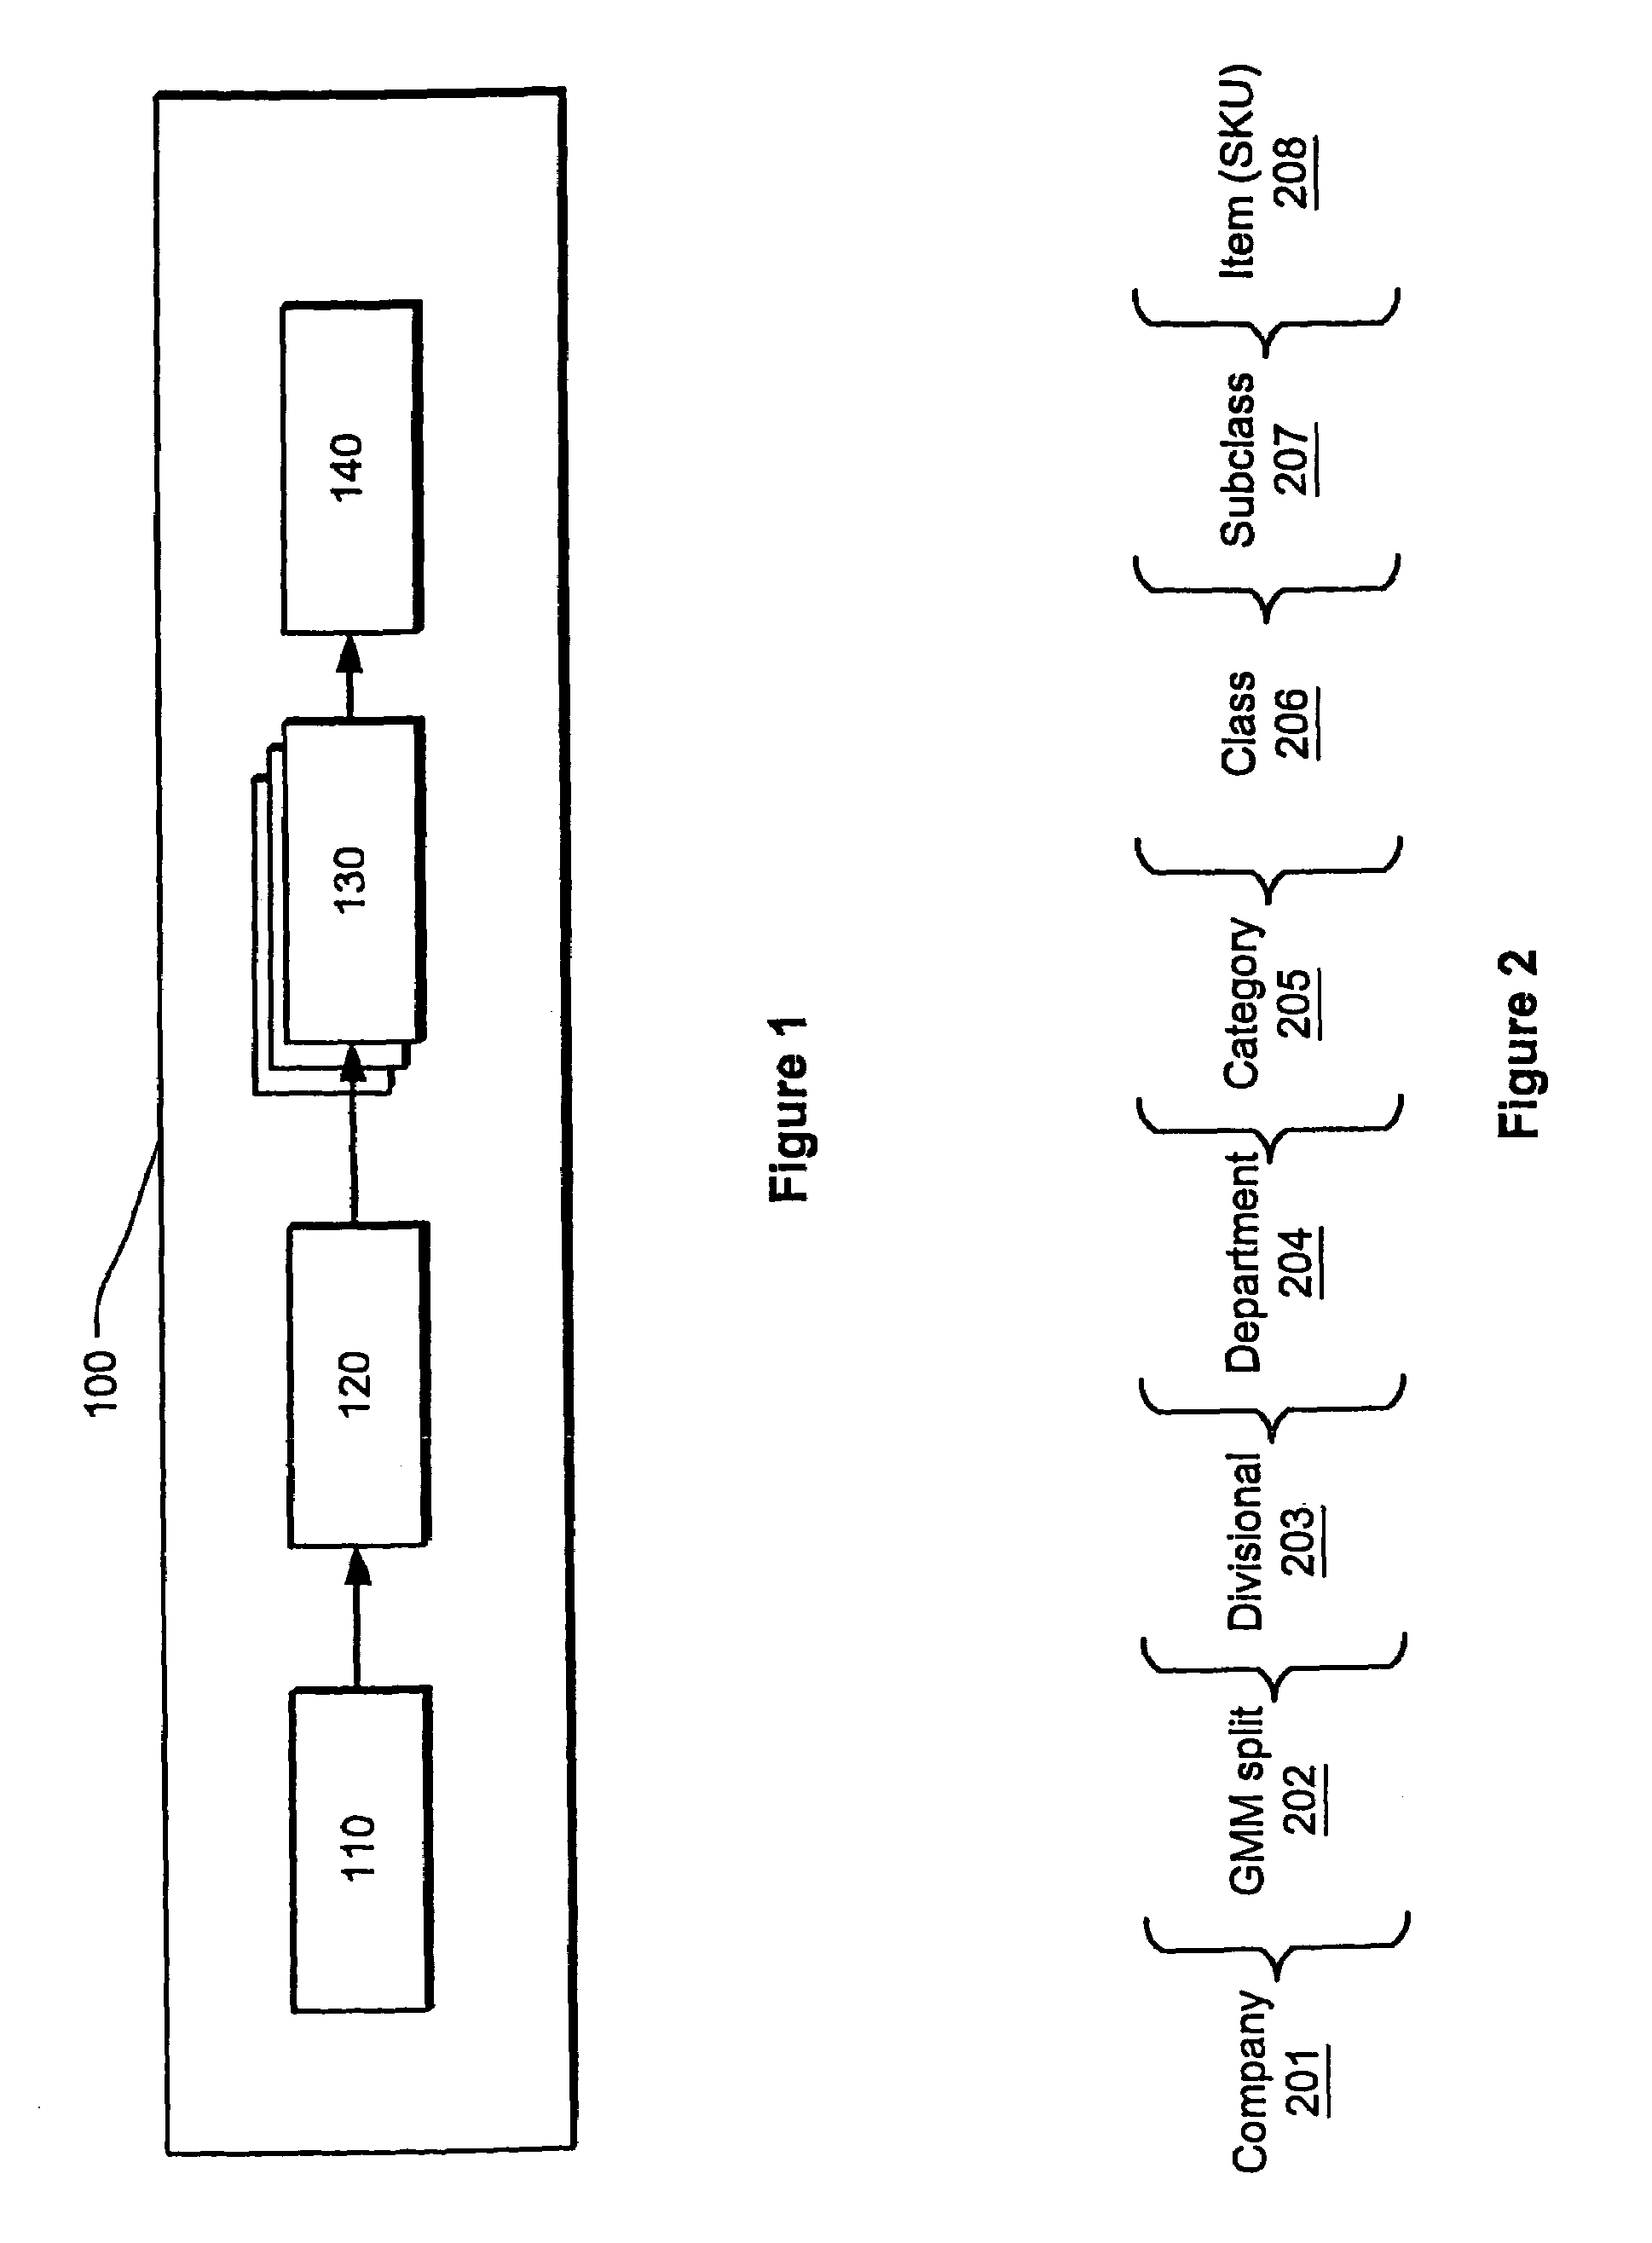 Method and apparatus for planning analysis